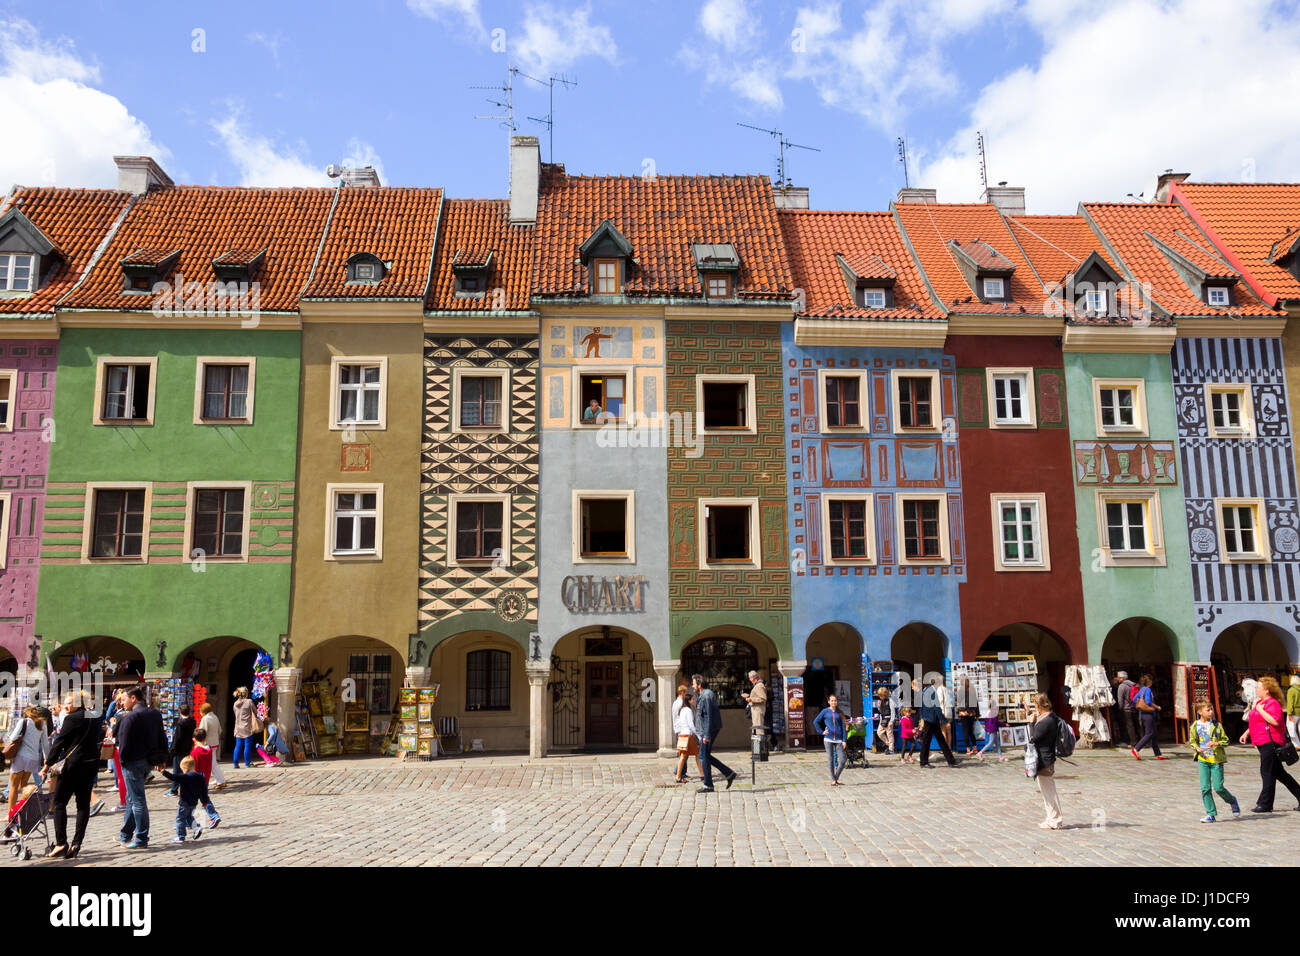 POZNAN, POLAND - AUG 20, 2014: Colorfull houses on the central square in Poznan, Poland. The city is the 4th largest and the 3rd most visited city in  Stock Photo